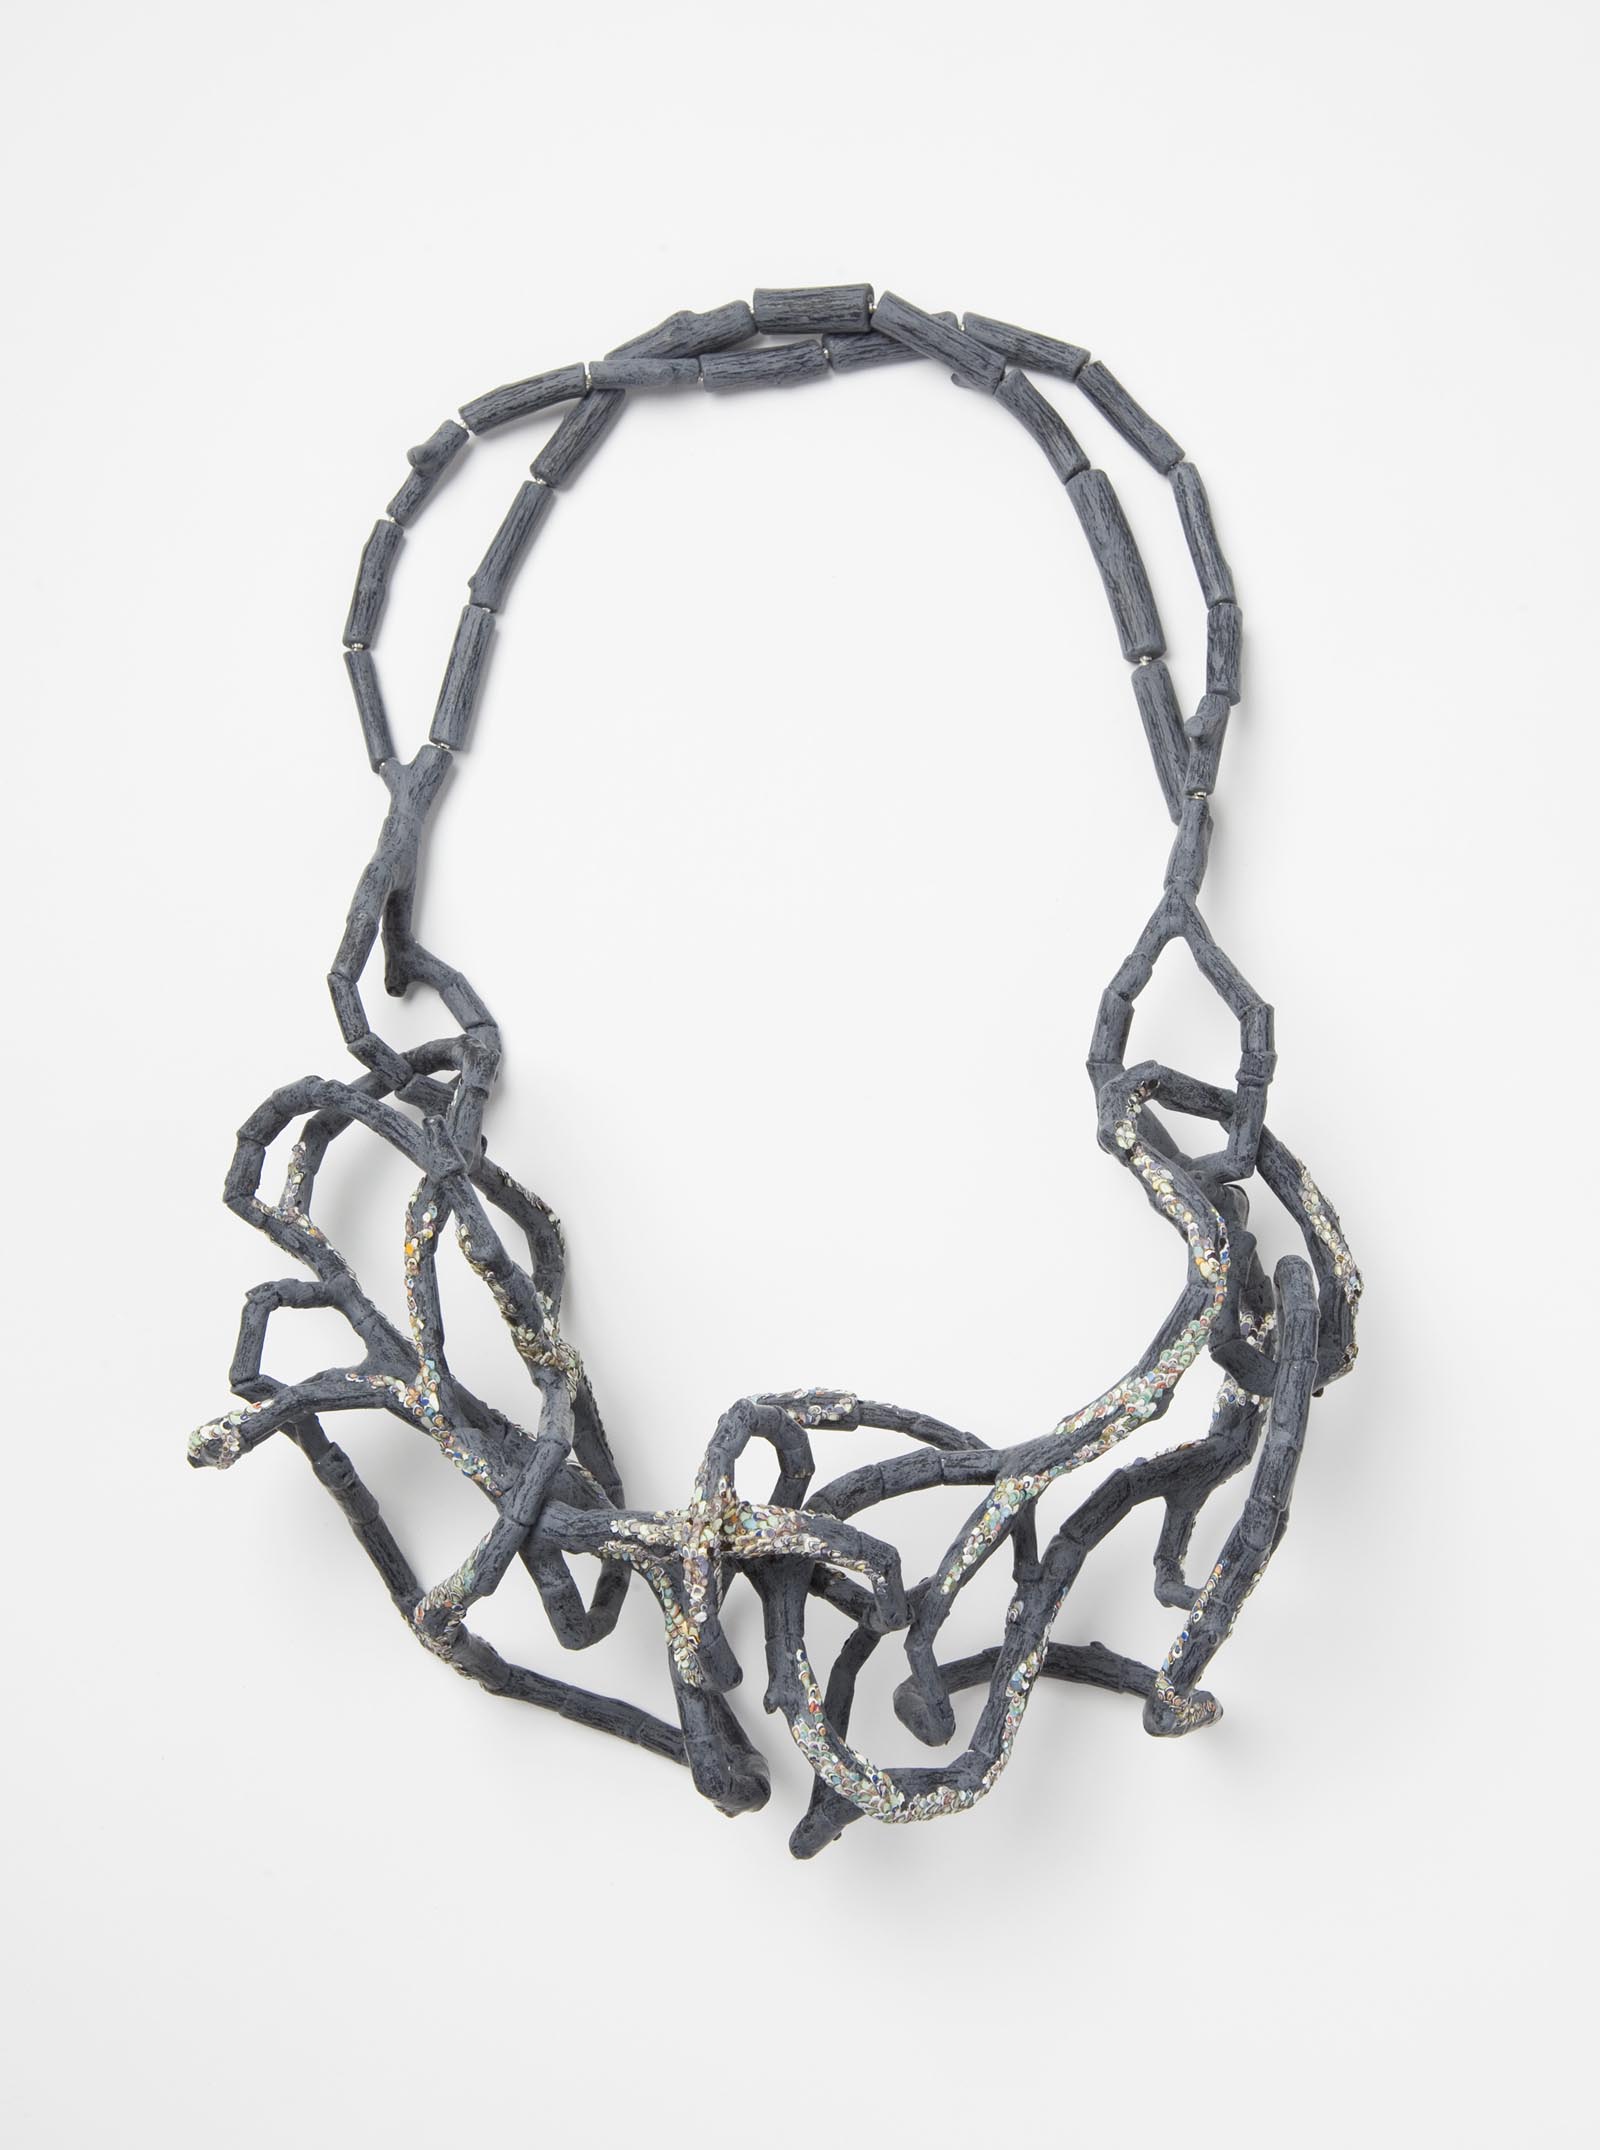 "Confused Branches 3" I Necklace, 2015 I Wood, graffiti, silver, steel wire, paint I Photo: Mirei Takeuchi